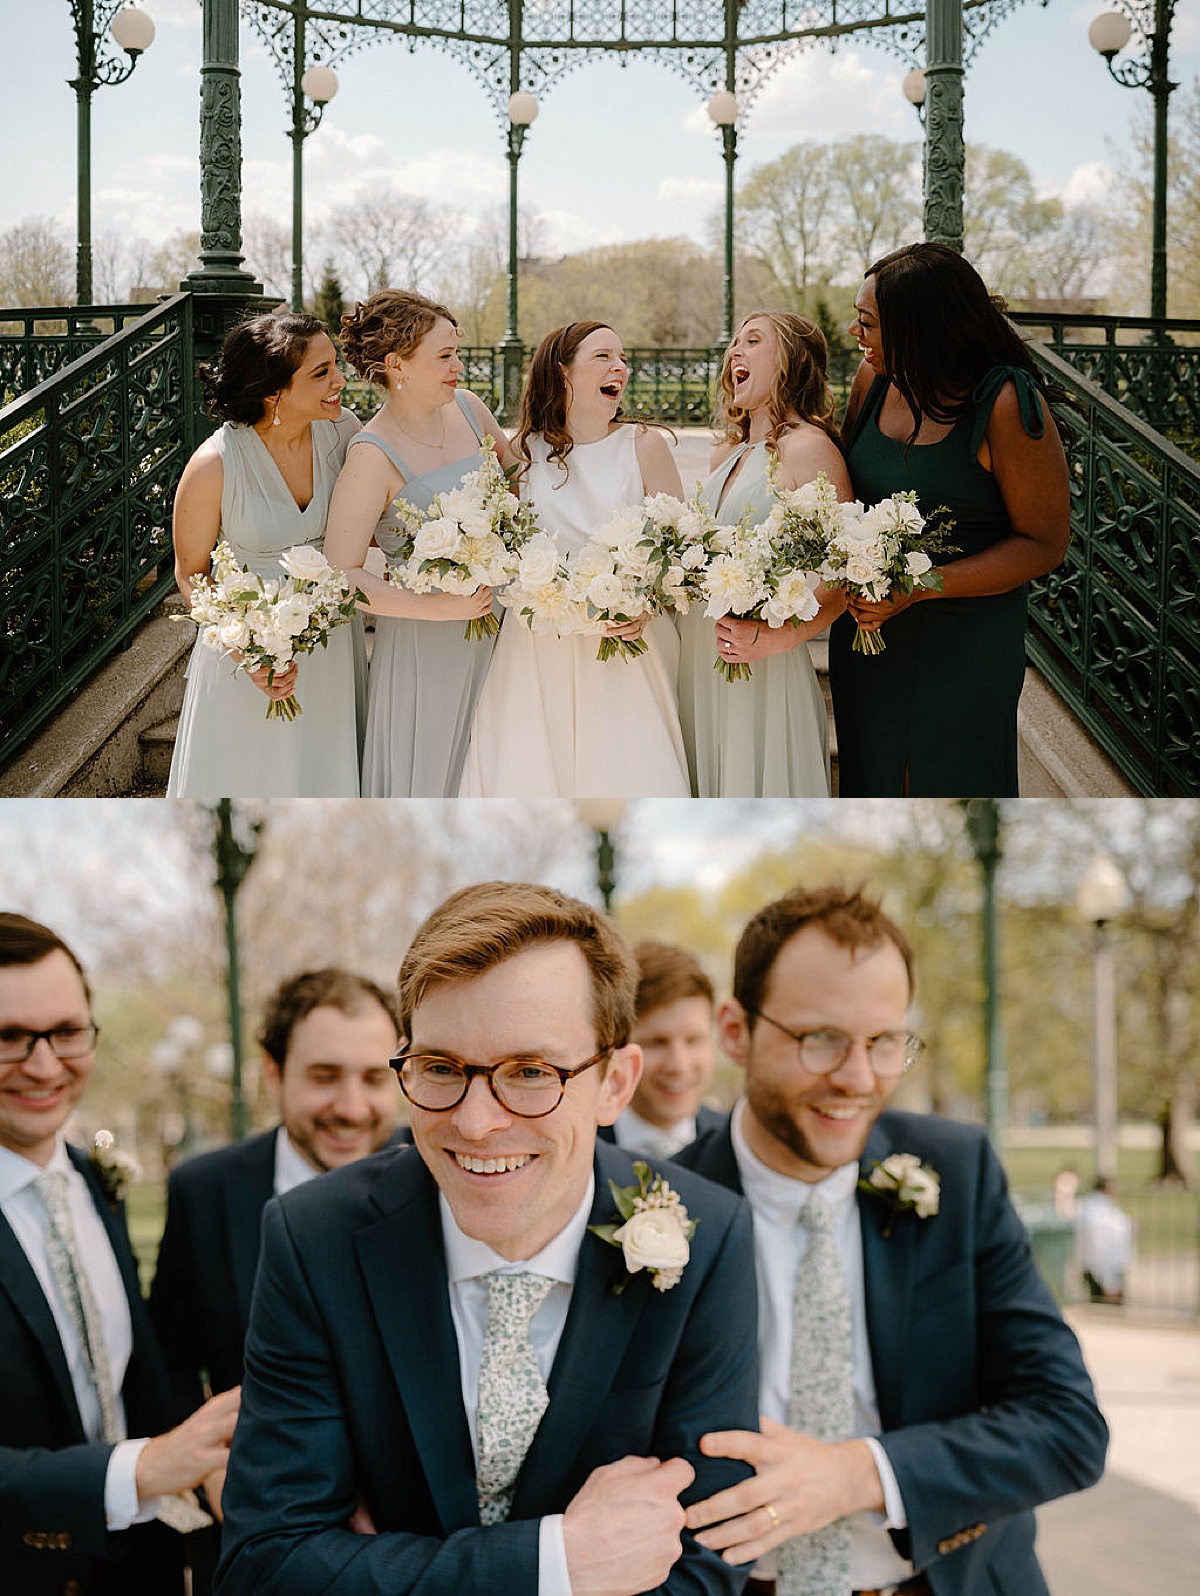 bridesmaids in seafoam green and groomsmen in navy blue suits pose with happy couple shot by Indigo Lace Collective